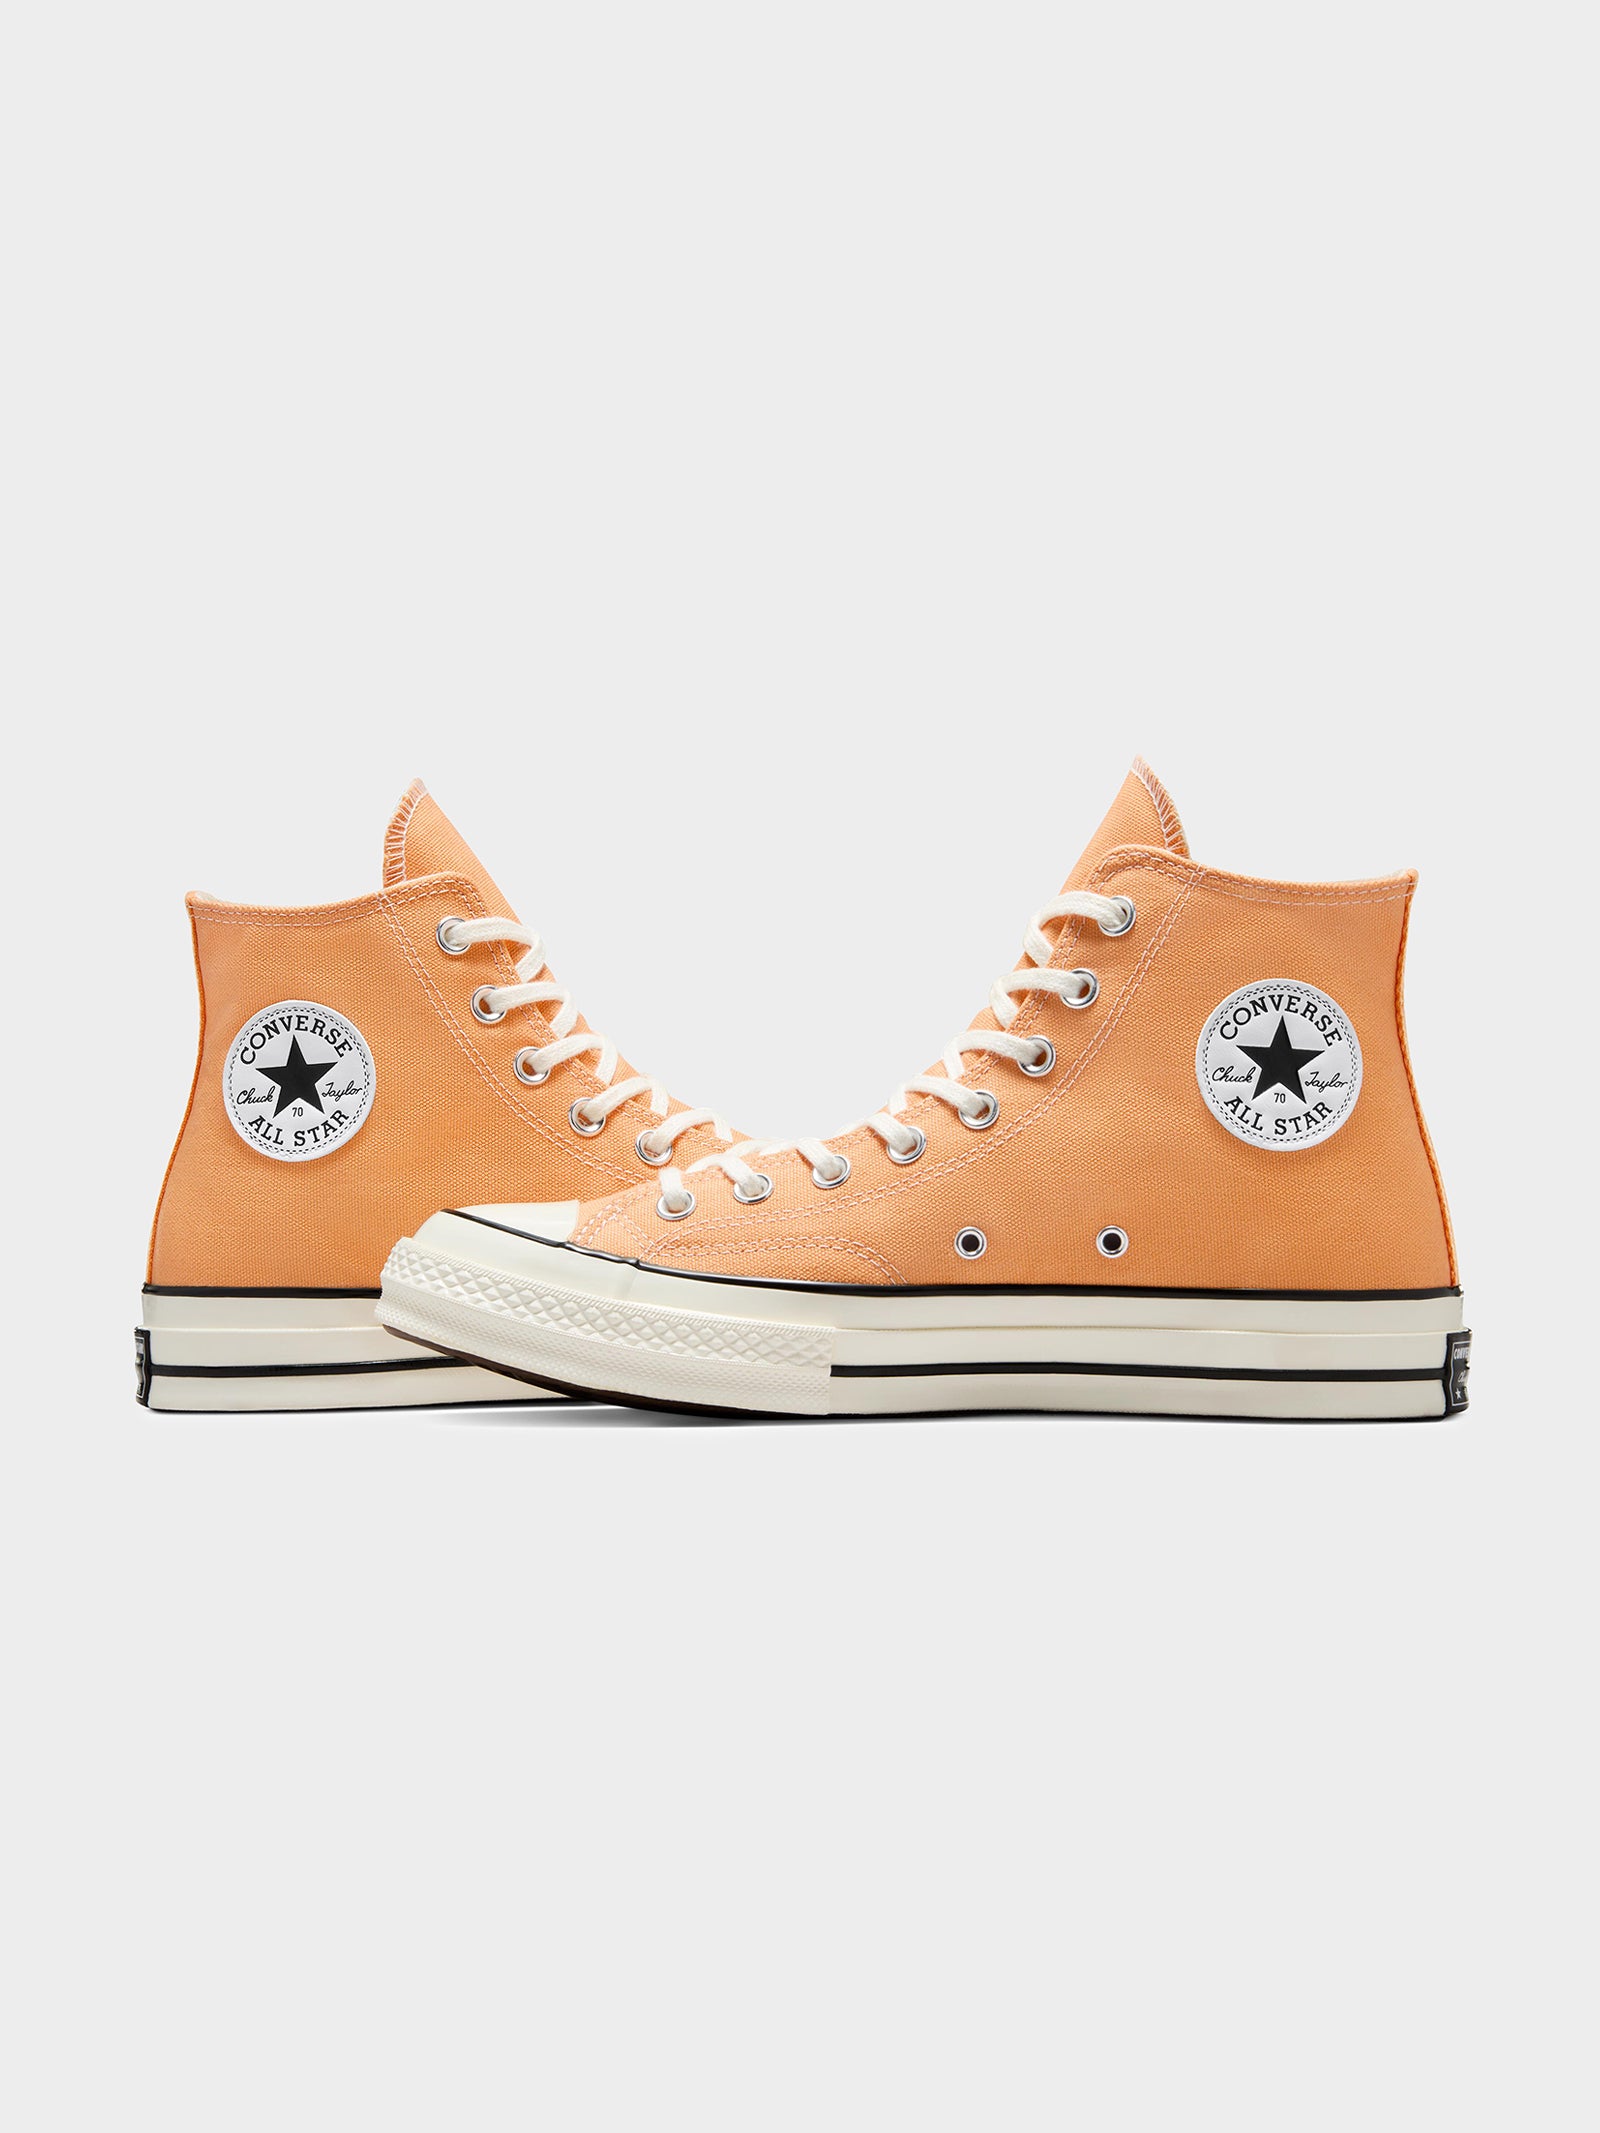 Unisex Converse Chuck 70 Vintage Canvas High Top Sneakers in Tiger Moth